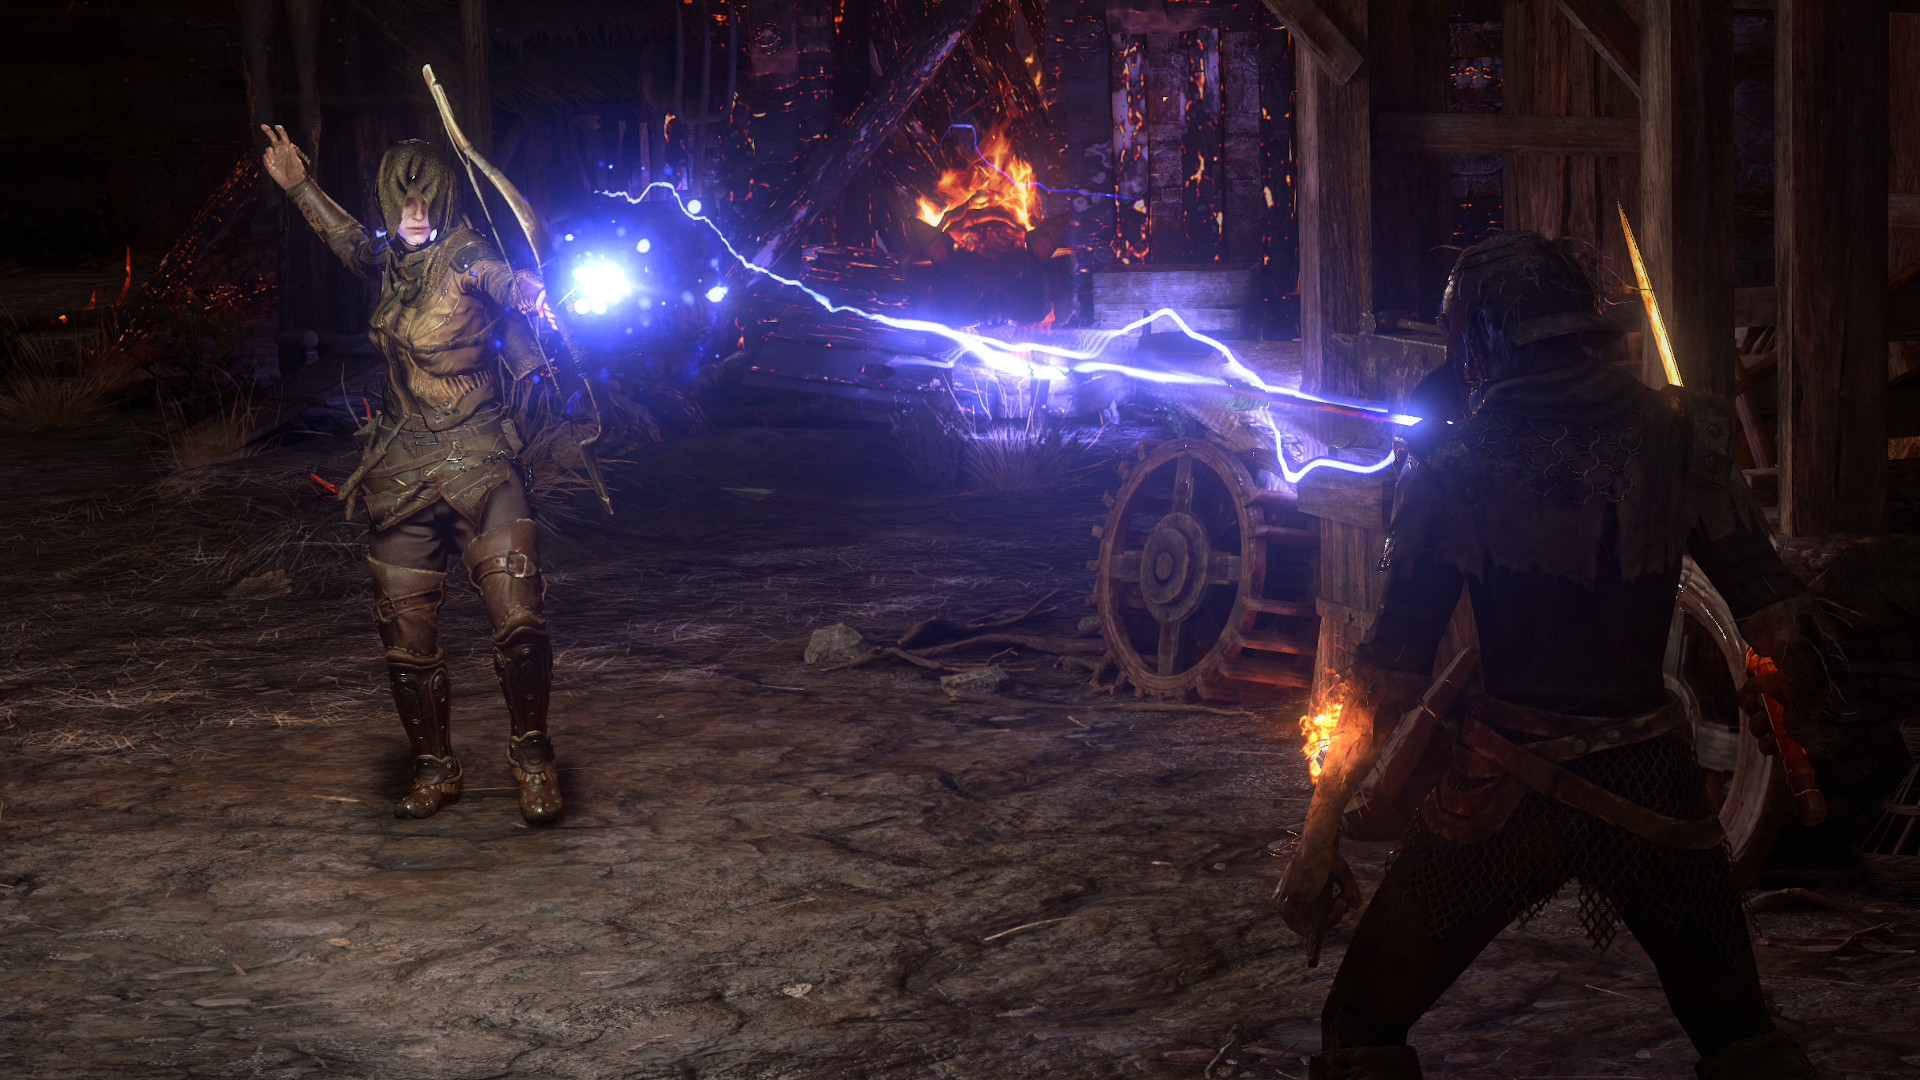 Path of Exile 2 is a bold, blood-soaked sequel unchained from the first game’s old school design